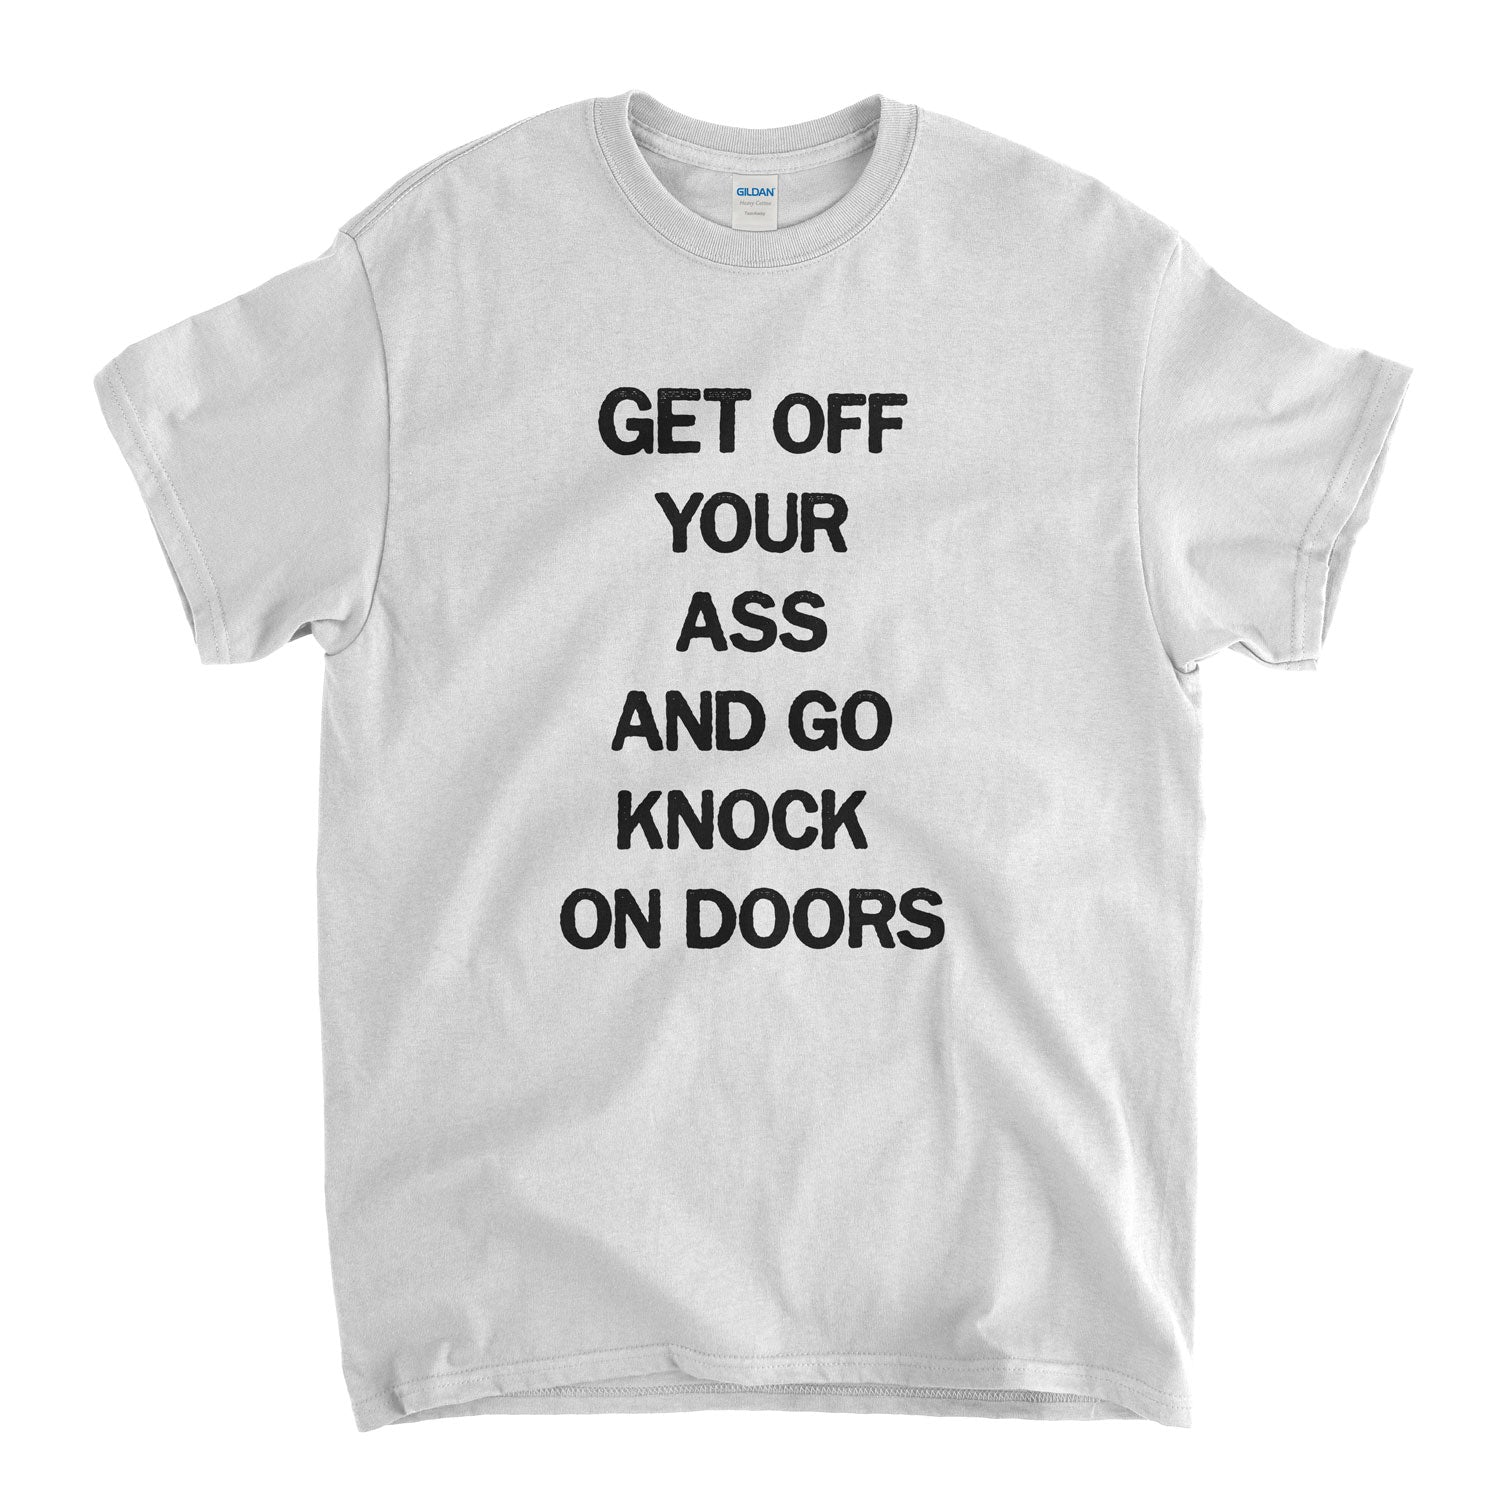 Inspired By Bosch T Shirt Get Off Your Ass And Go Knock On Doors